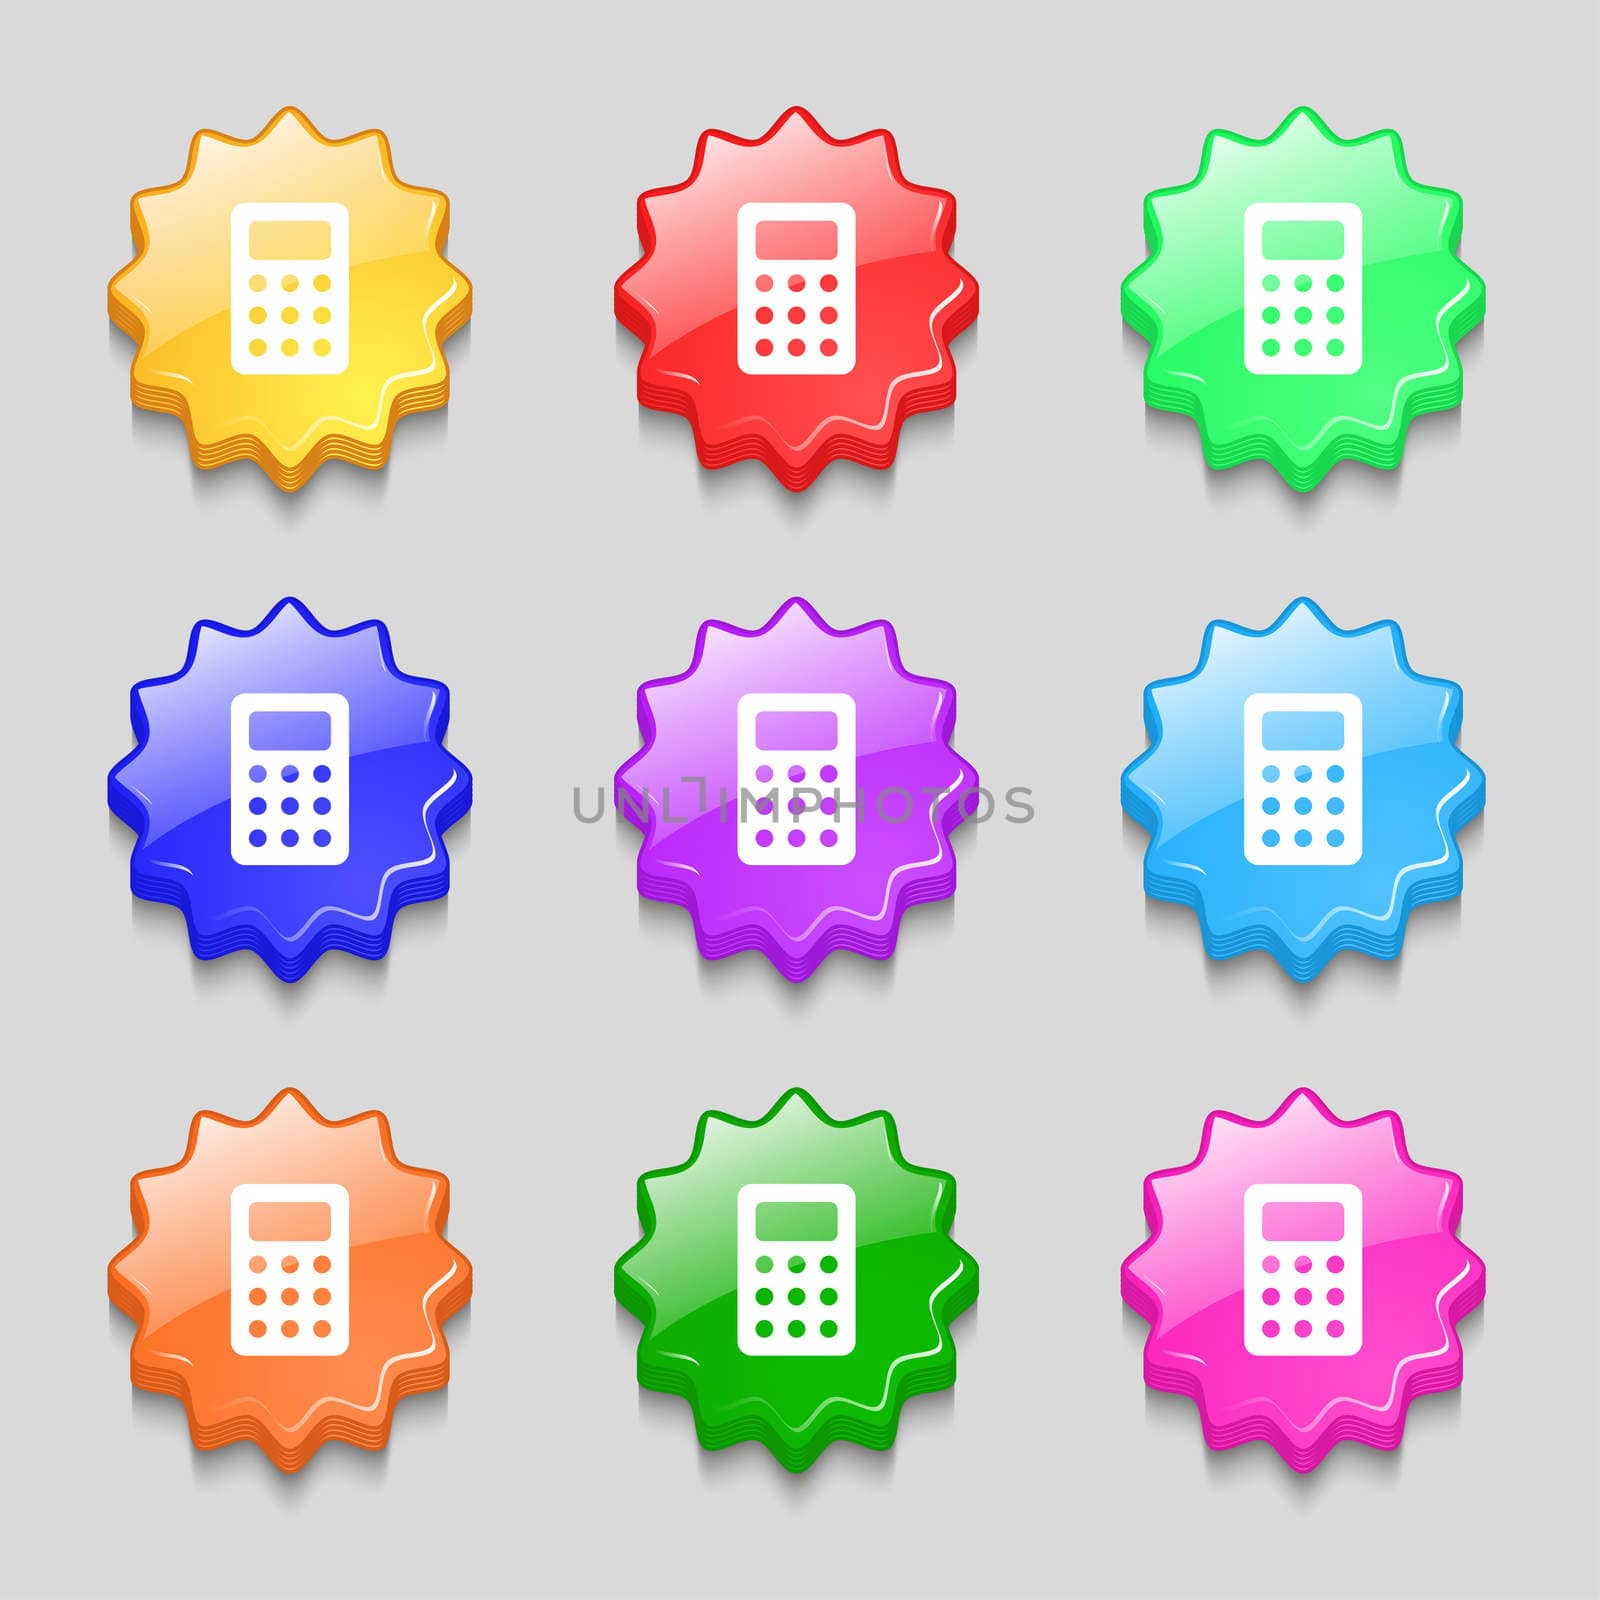 Calculator, Bookkeeping icon sign. symbol on nine wavy colourful buttons. illustration